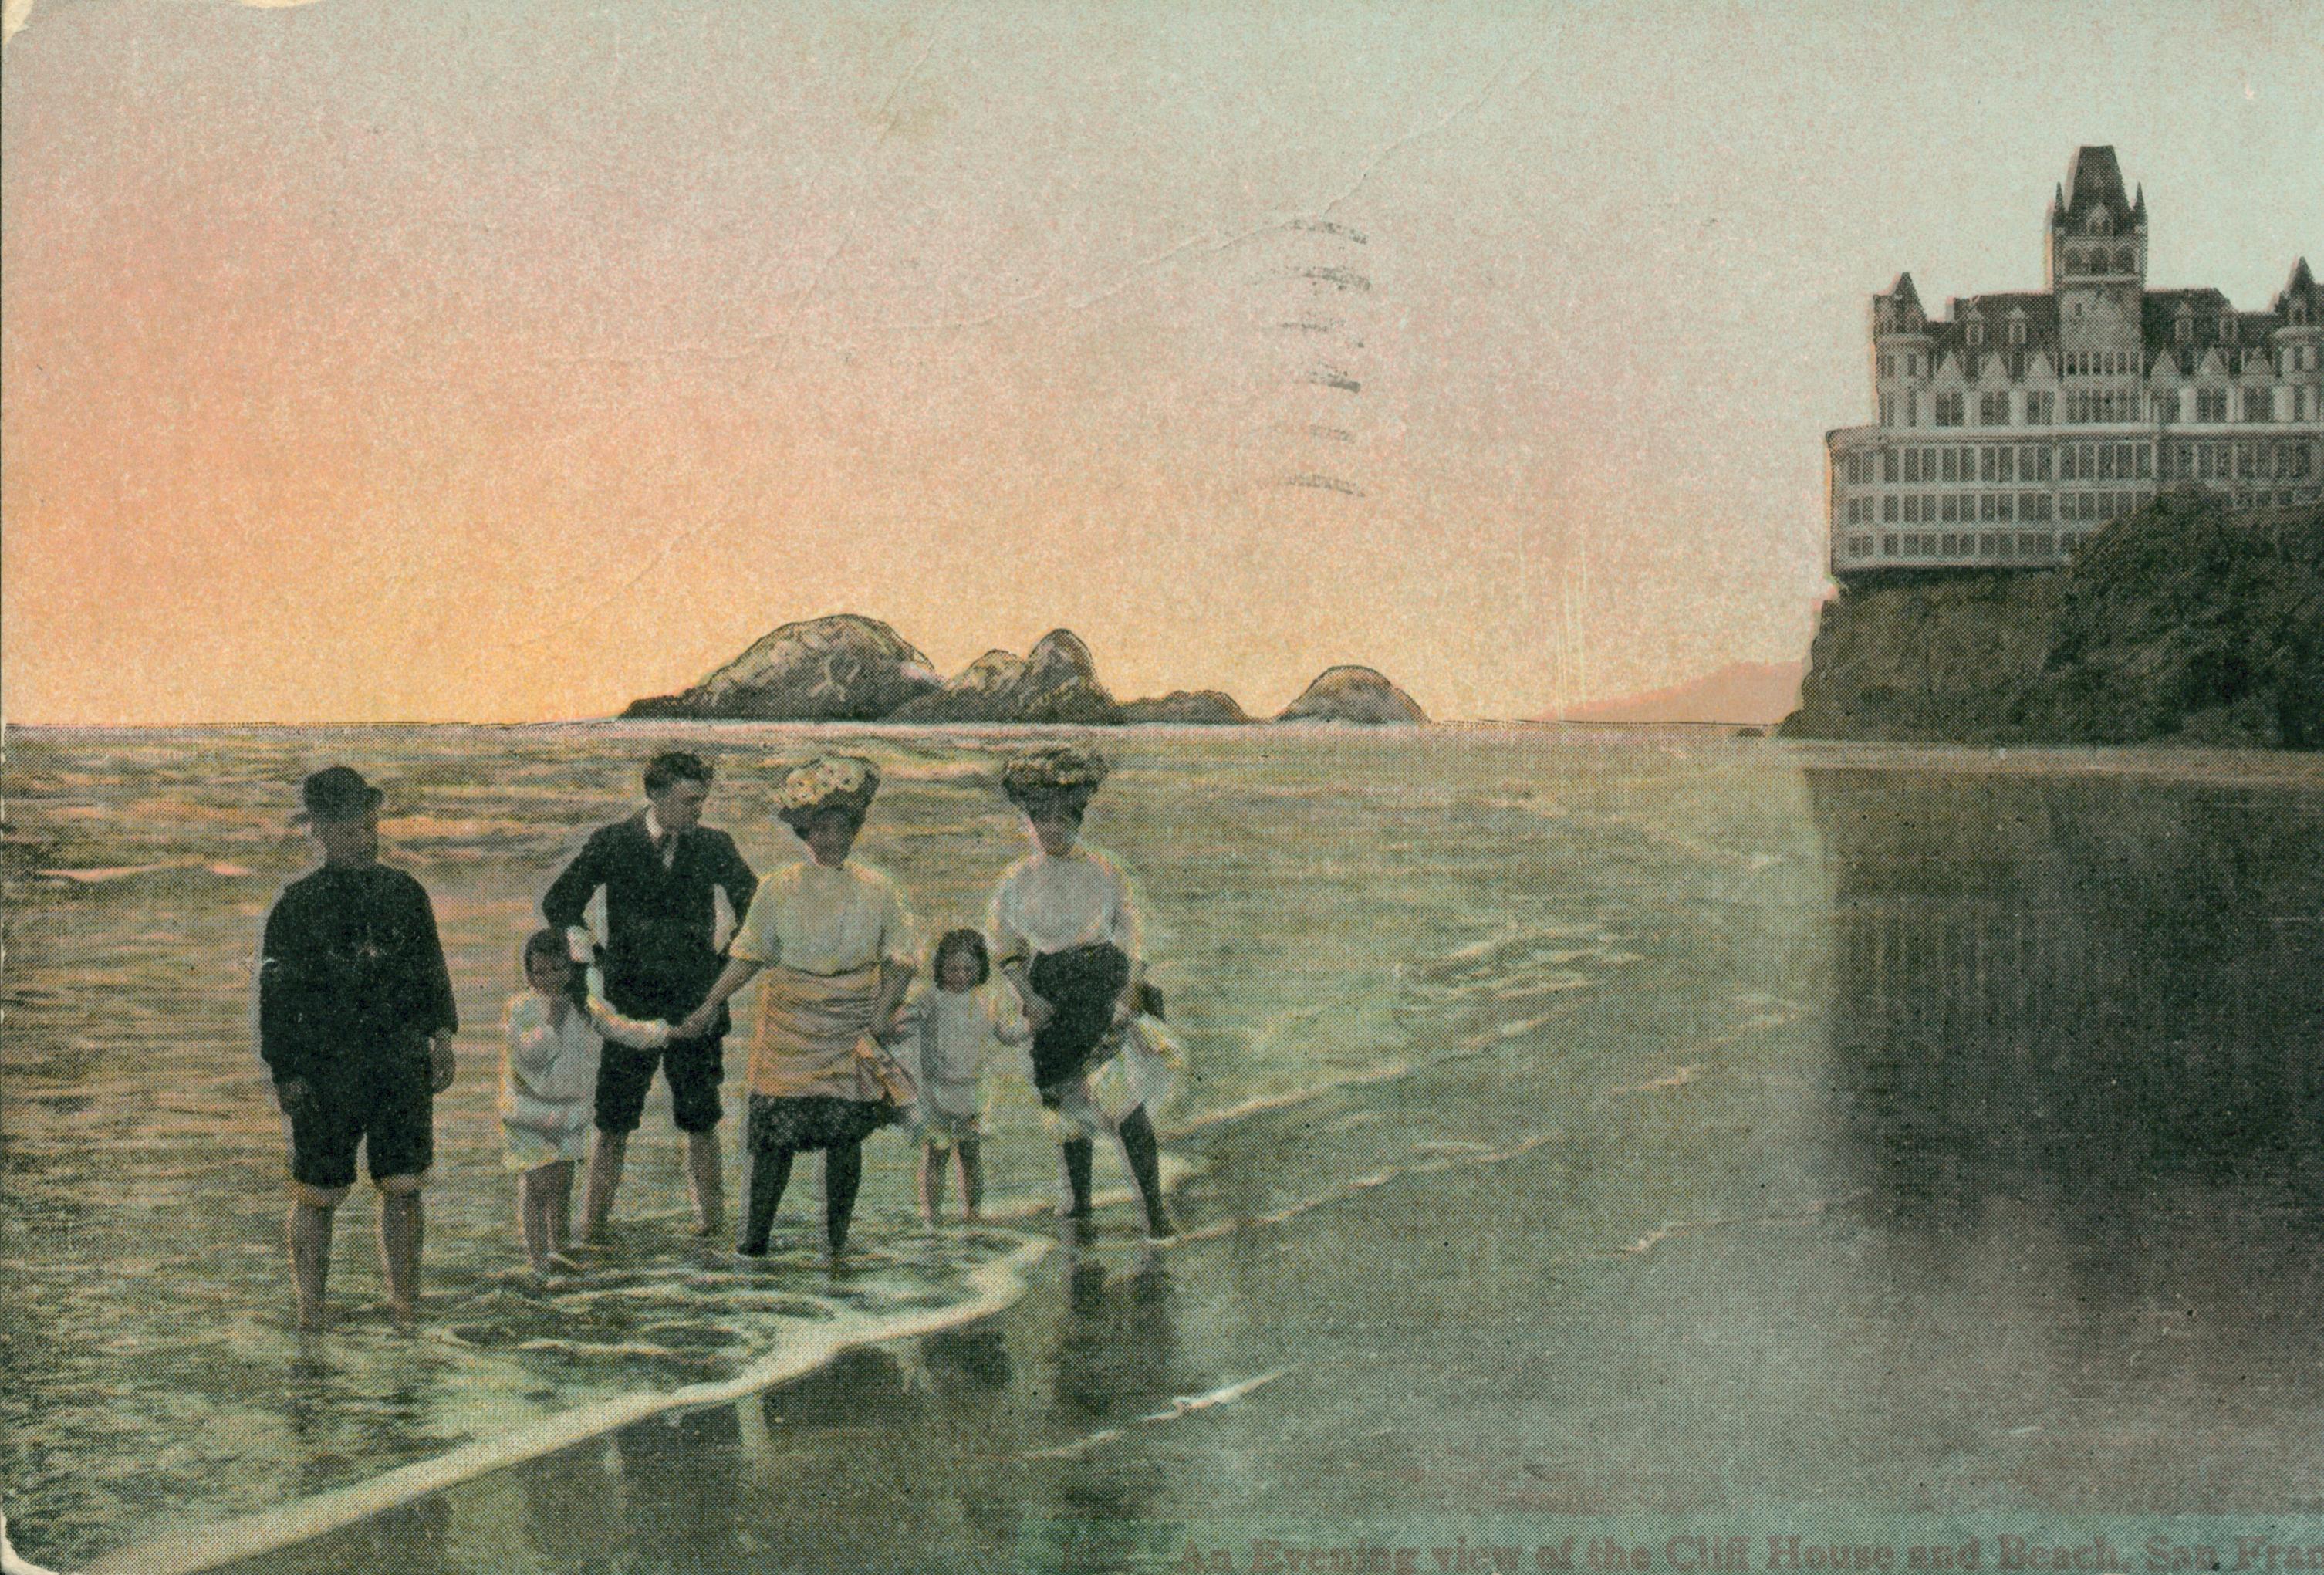 Shows the San Francisco Cliff House and Seal Rocks at sunset, with a family posed on the beach in foreground.